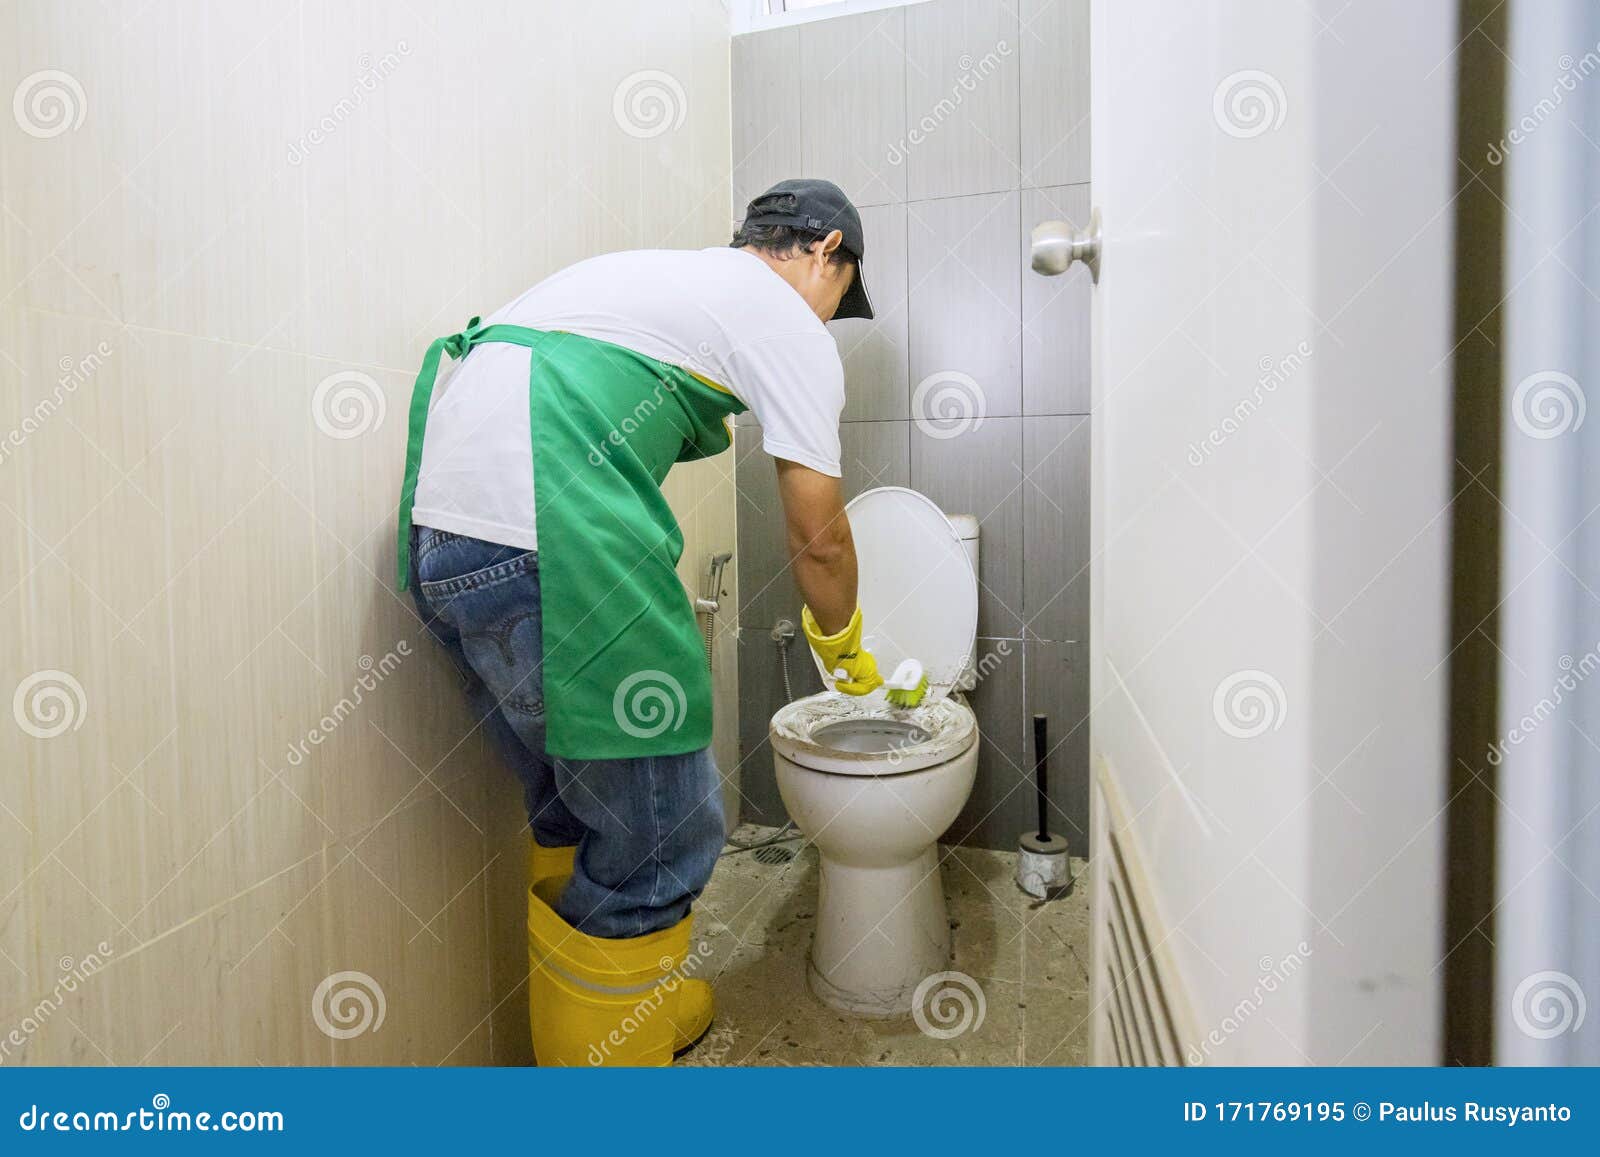 Attractive Housekeeping Cleaning Out A Toilet Stock Photo 